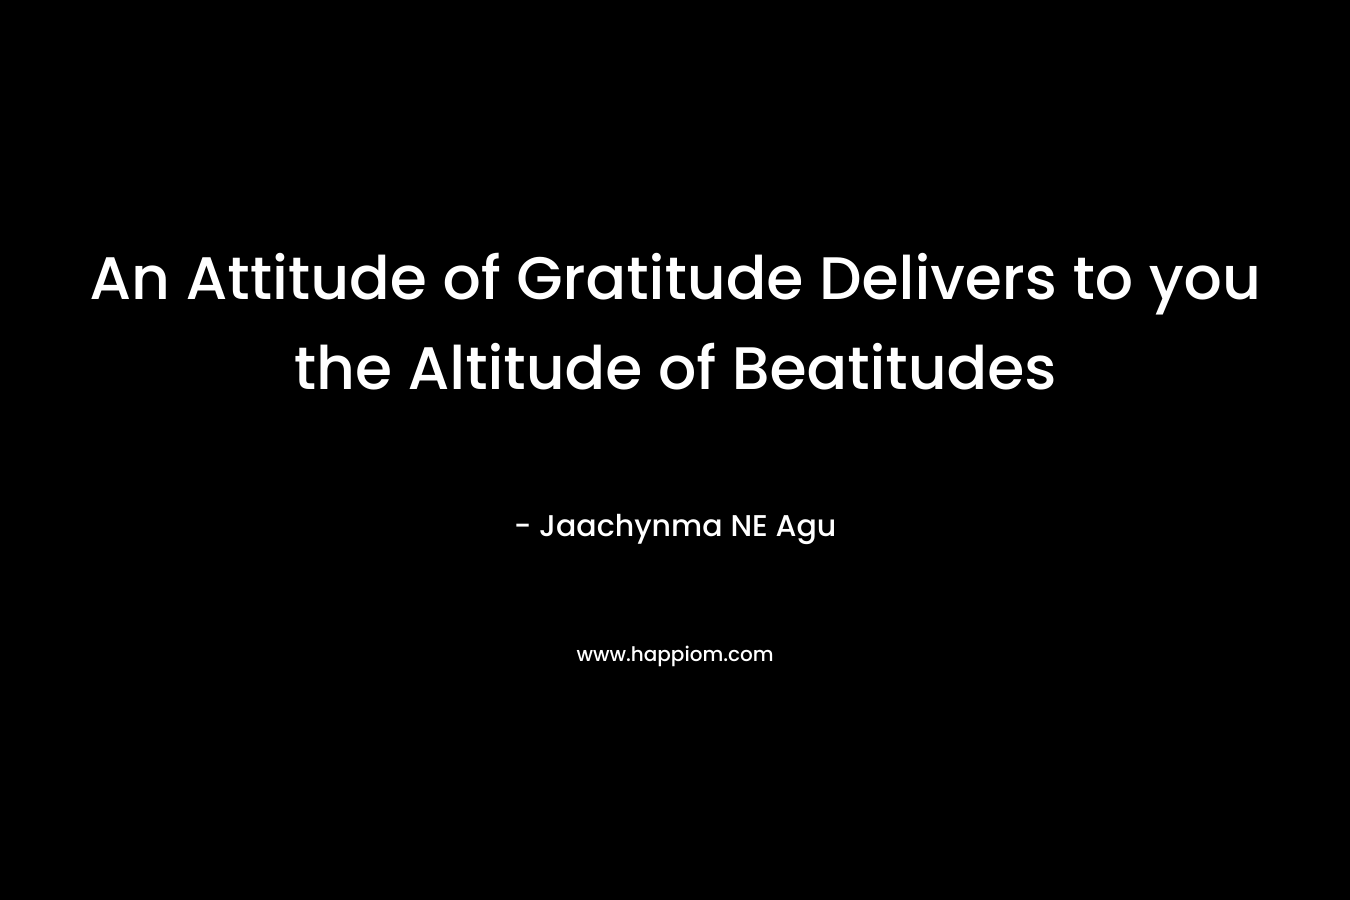 An Attitude of Gratitude Delivers to you the Altitude of Beatitudes